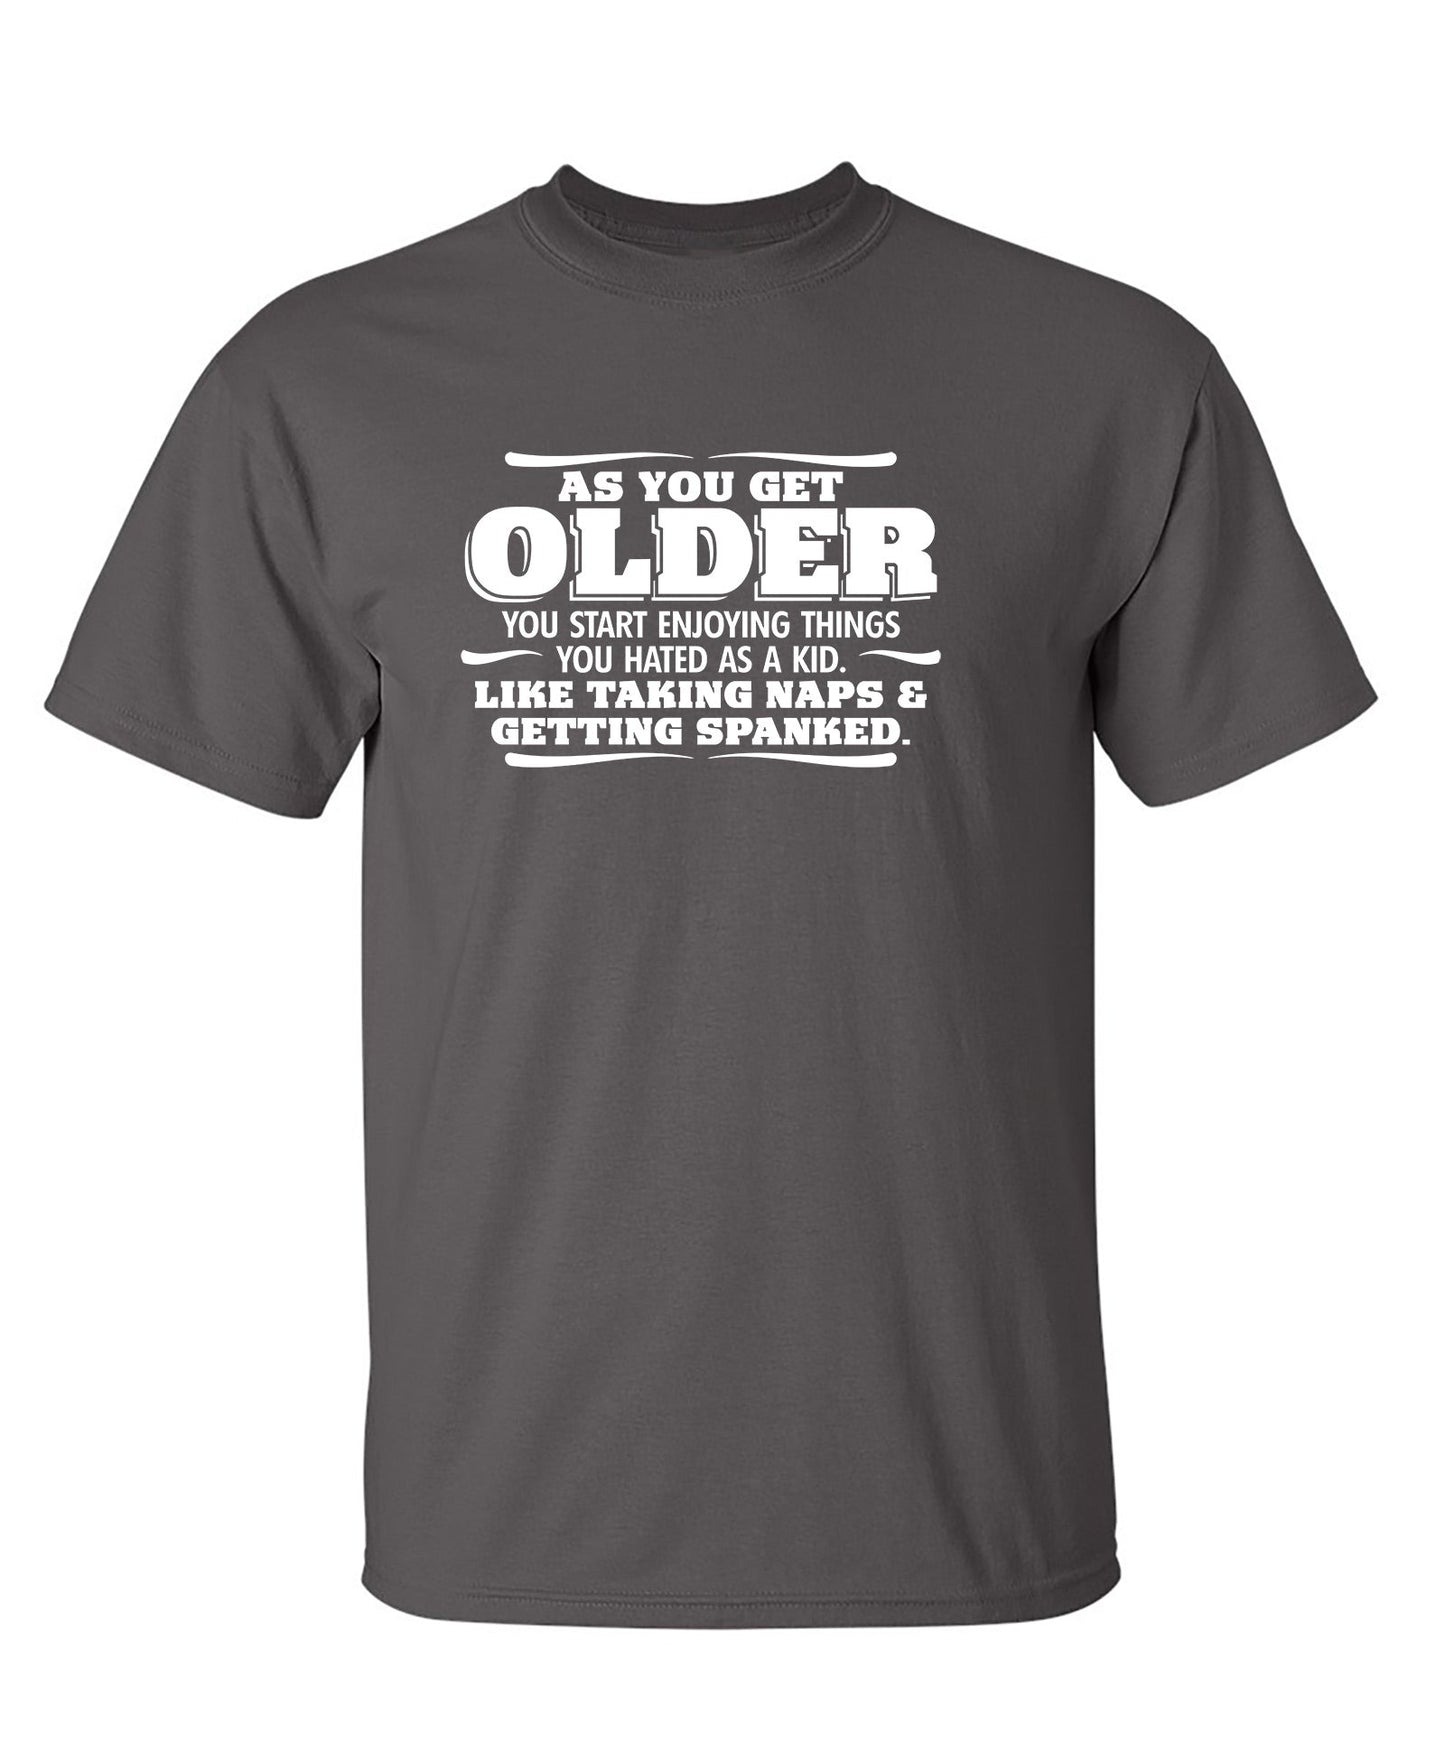 As You Get Older Enjoy Taking Naps and G... - Funny Tee